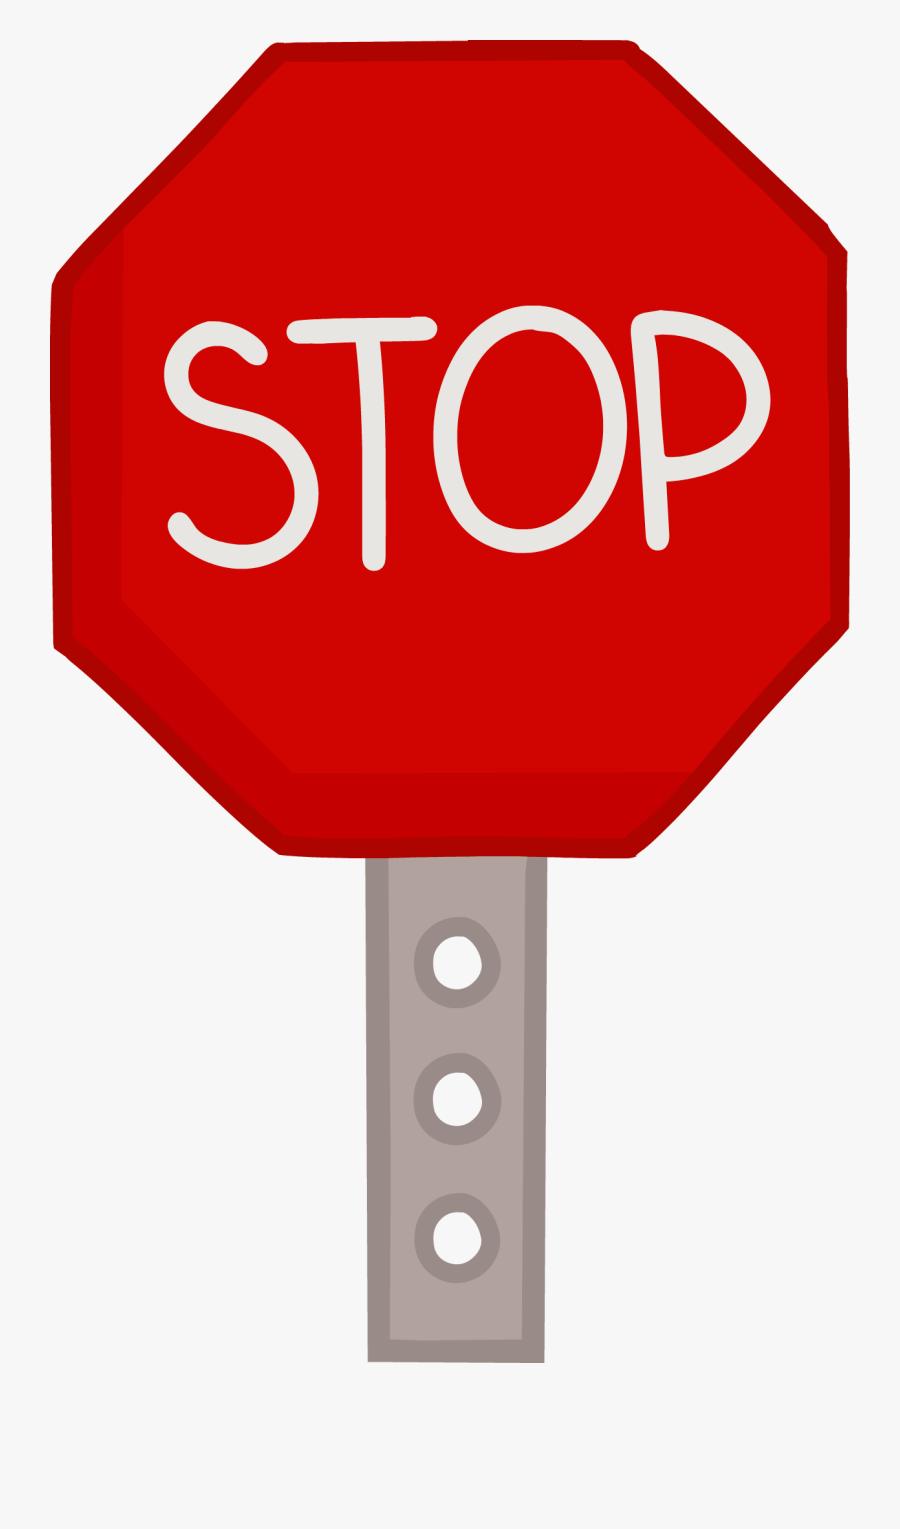 Hd Royalty Free Clipart - Royalty Free Stop Sign, Transparent Clipart